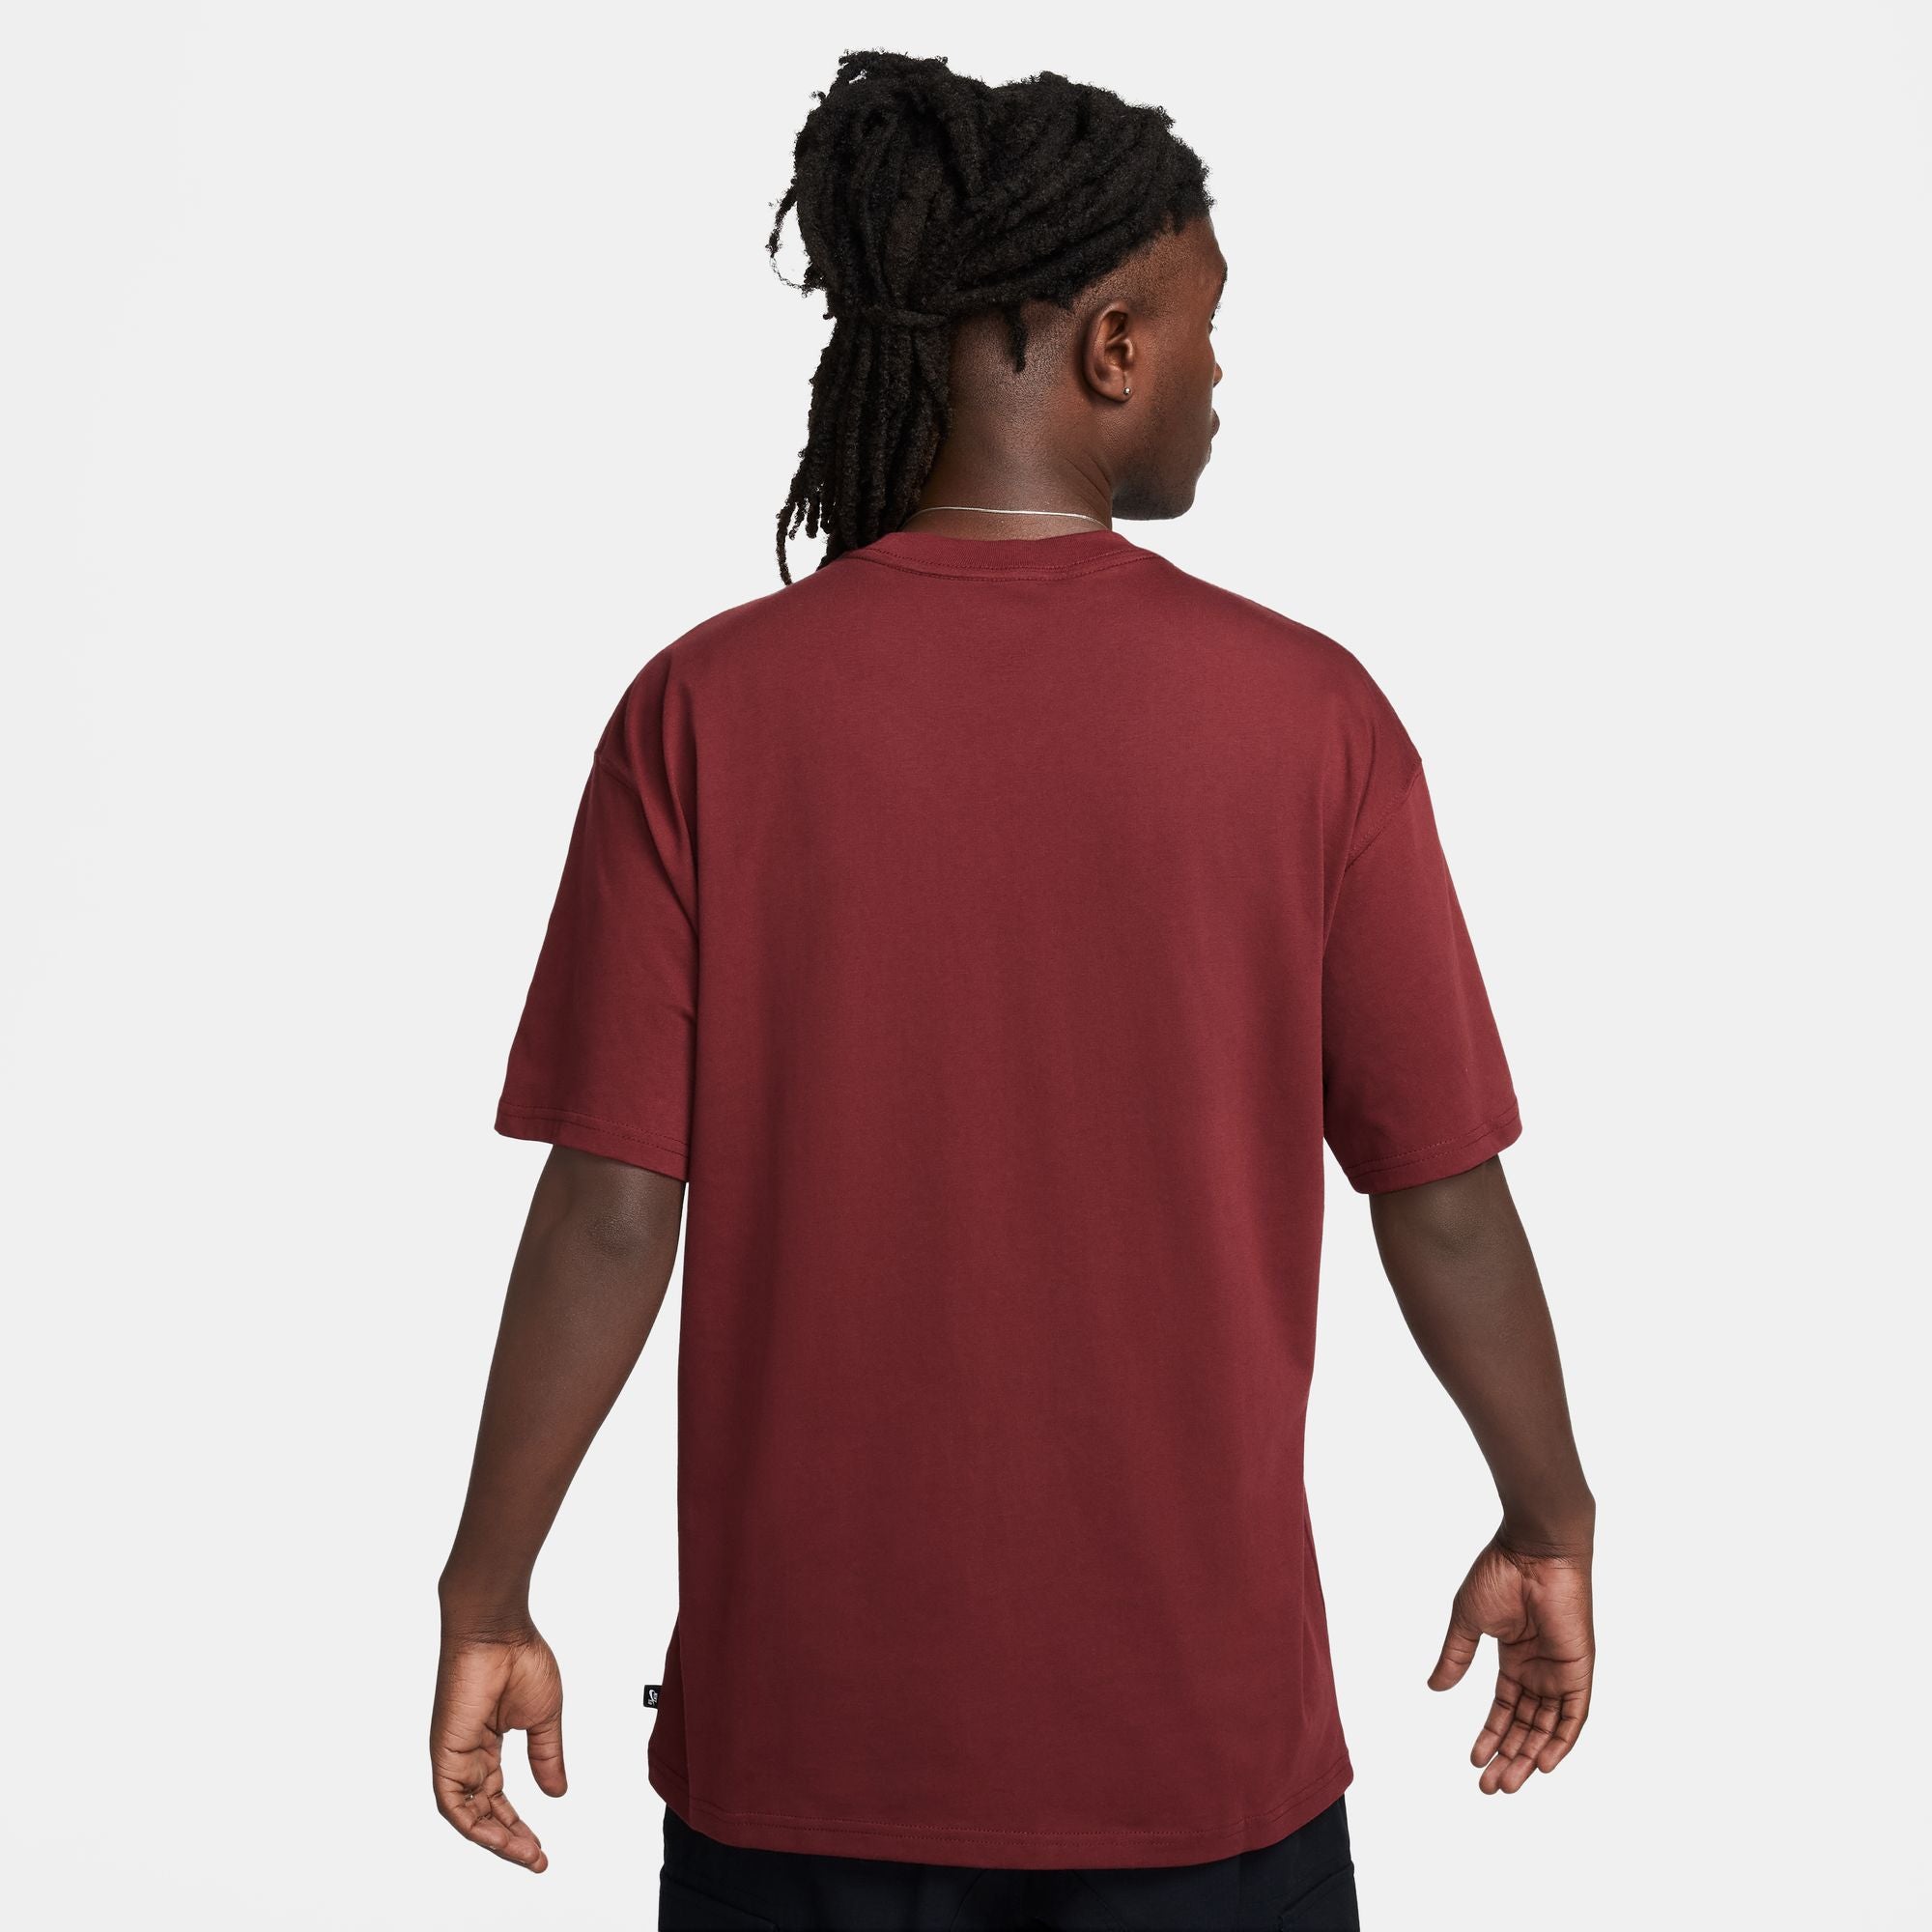 Logo T-shirt from Nike SB, in dark red colour with large white Nike SB Logo on front.